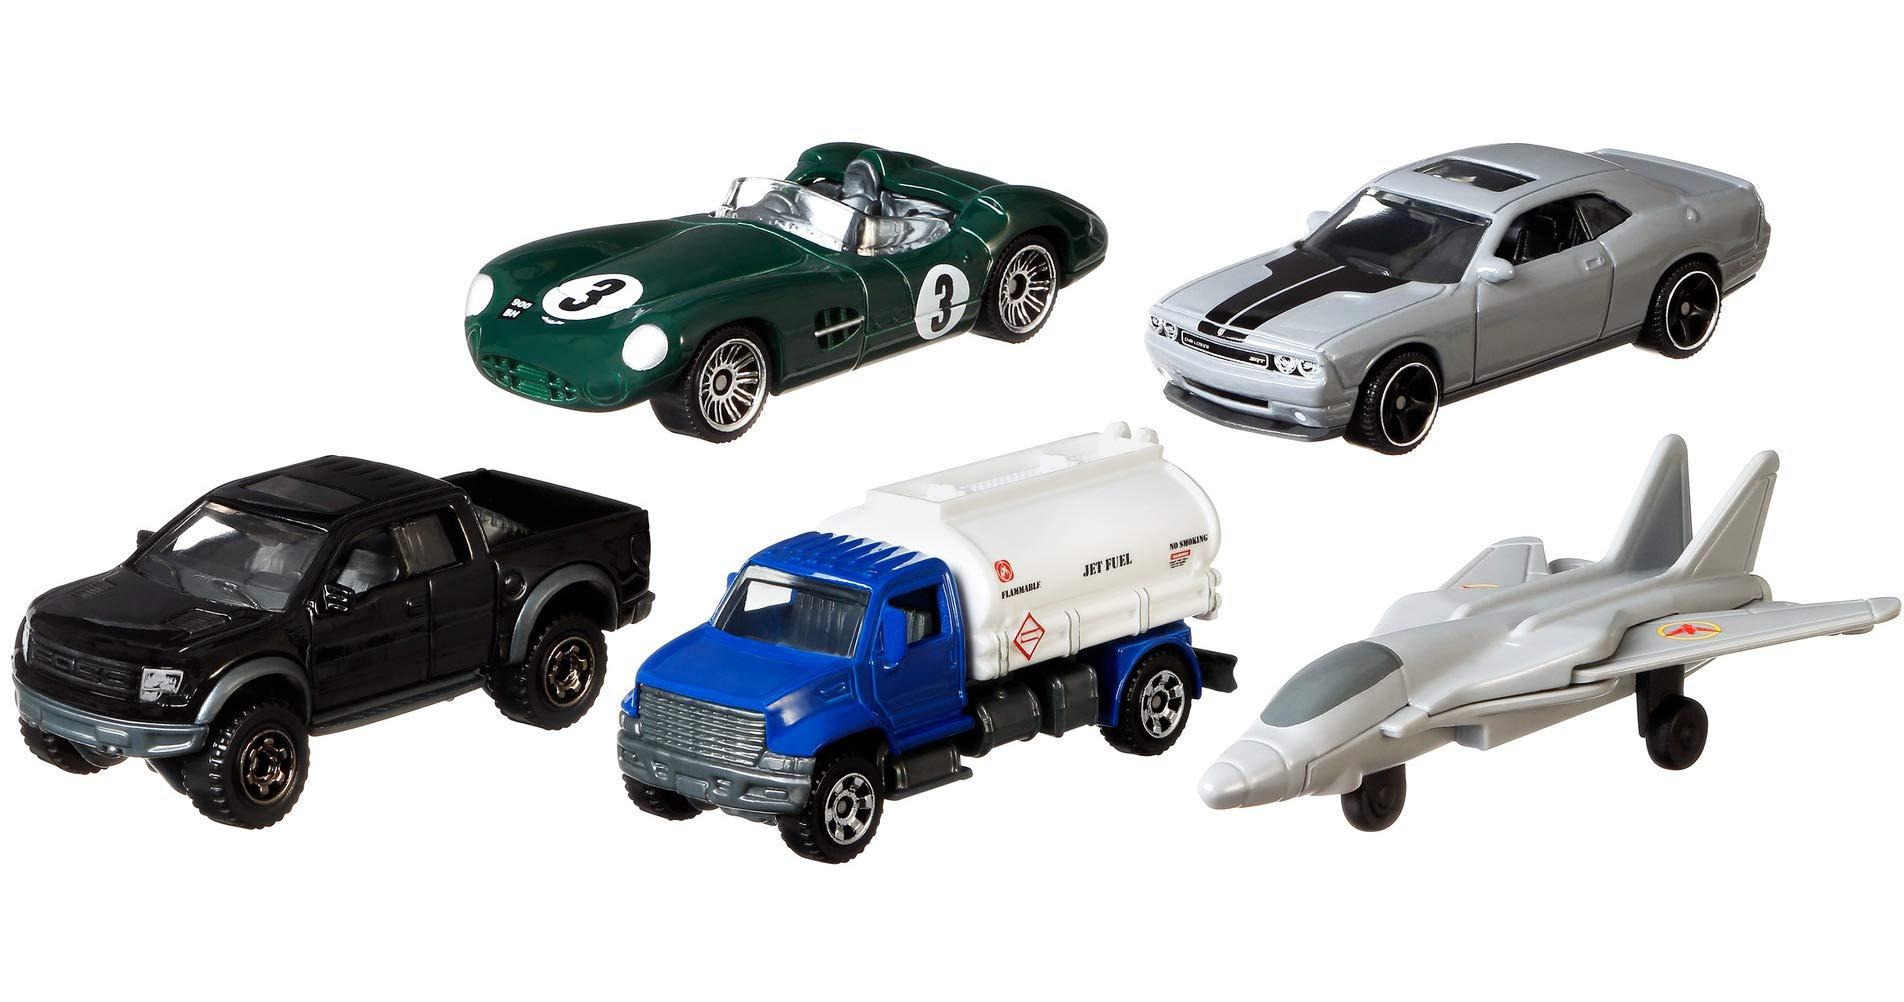 Matchbox Top Gun: Maverick 5-Pack of Vehicles & Planes for Kids 3 Years Old & Up, Authentic Design for Collectors